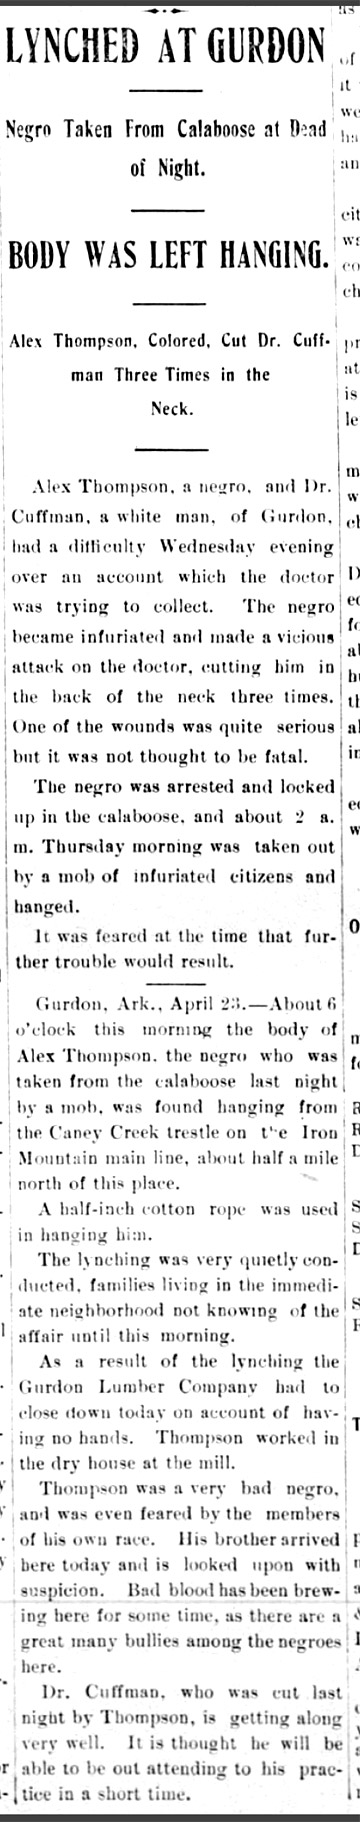 "Lynched at Gurdon" newspaper clipping